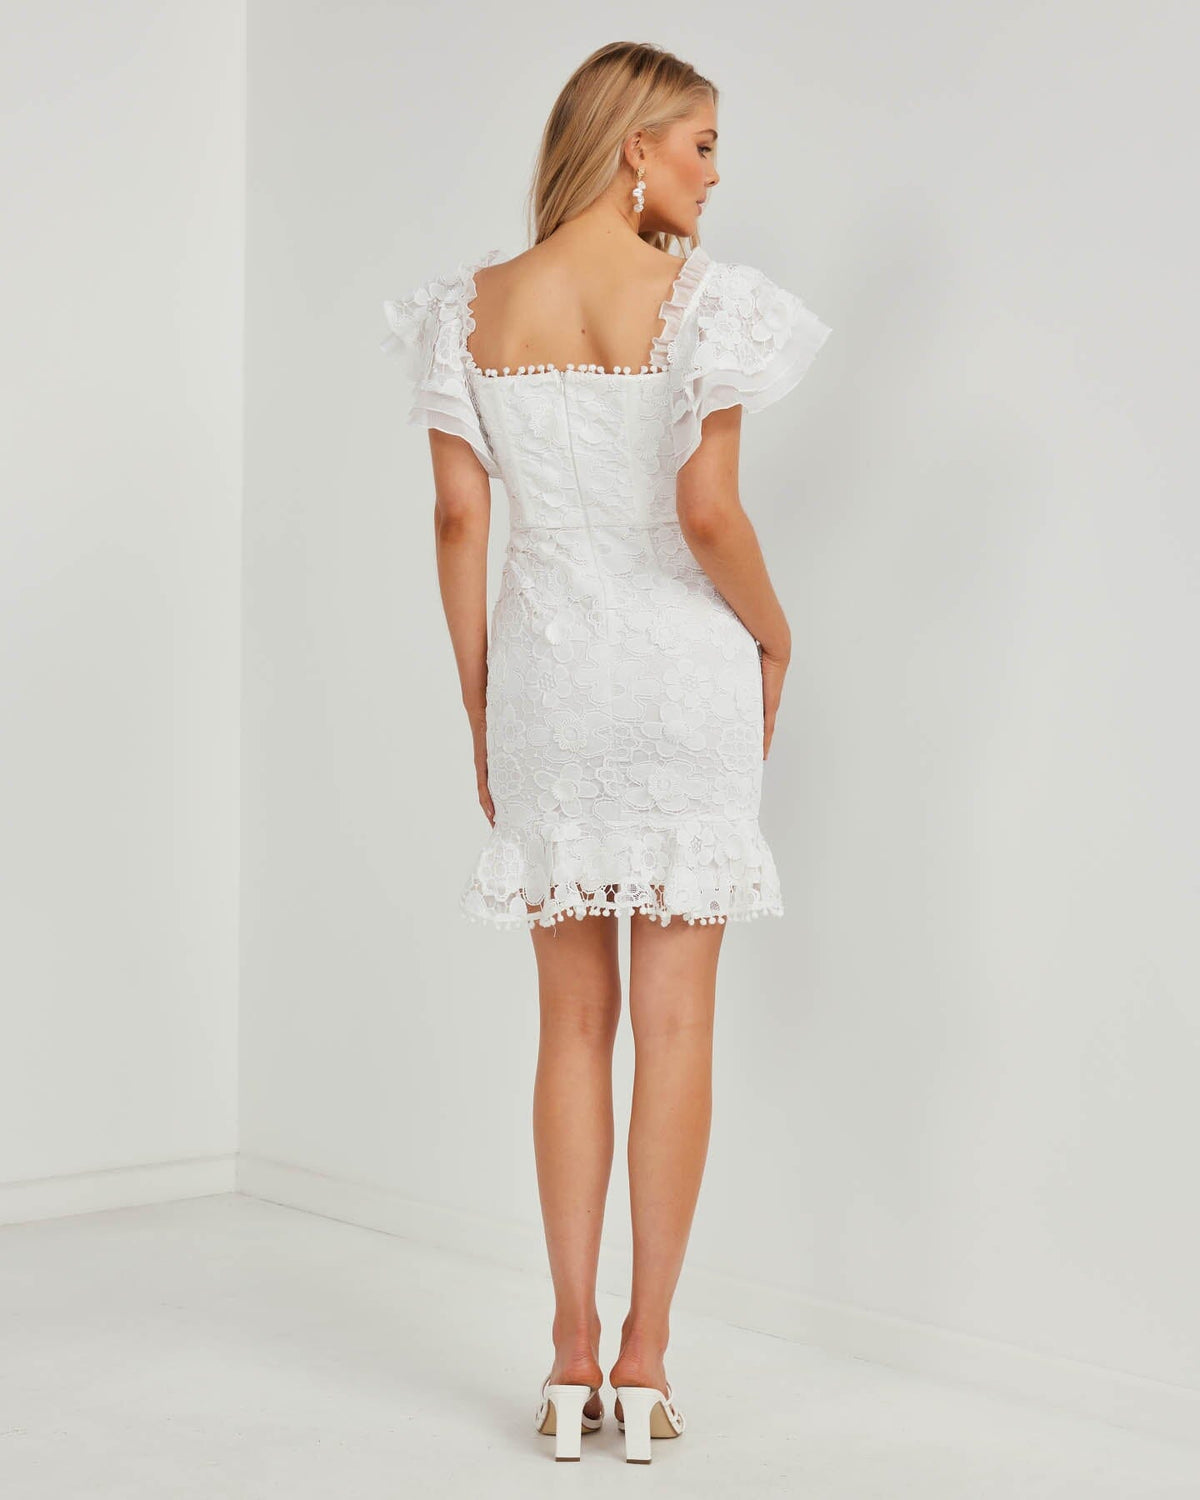 Half Open Back Design of Side Image showcasing Slimming Fit of Twosisters The Label White Floral Lace Mini Dress featuring Off The Shoulder Sweetheart Neckline and Frilled Hem Sleeves and Skirt